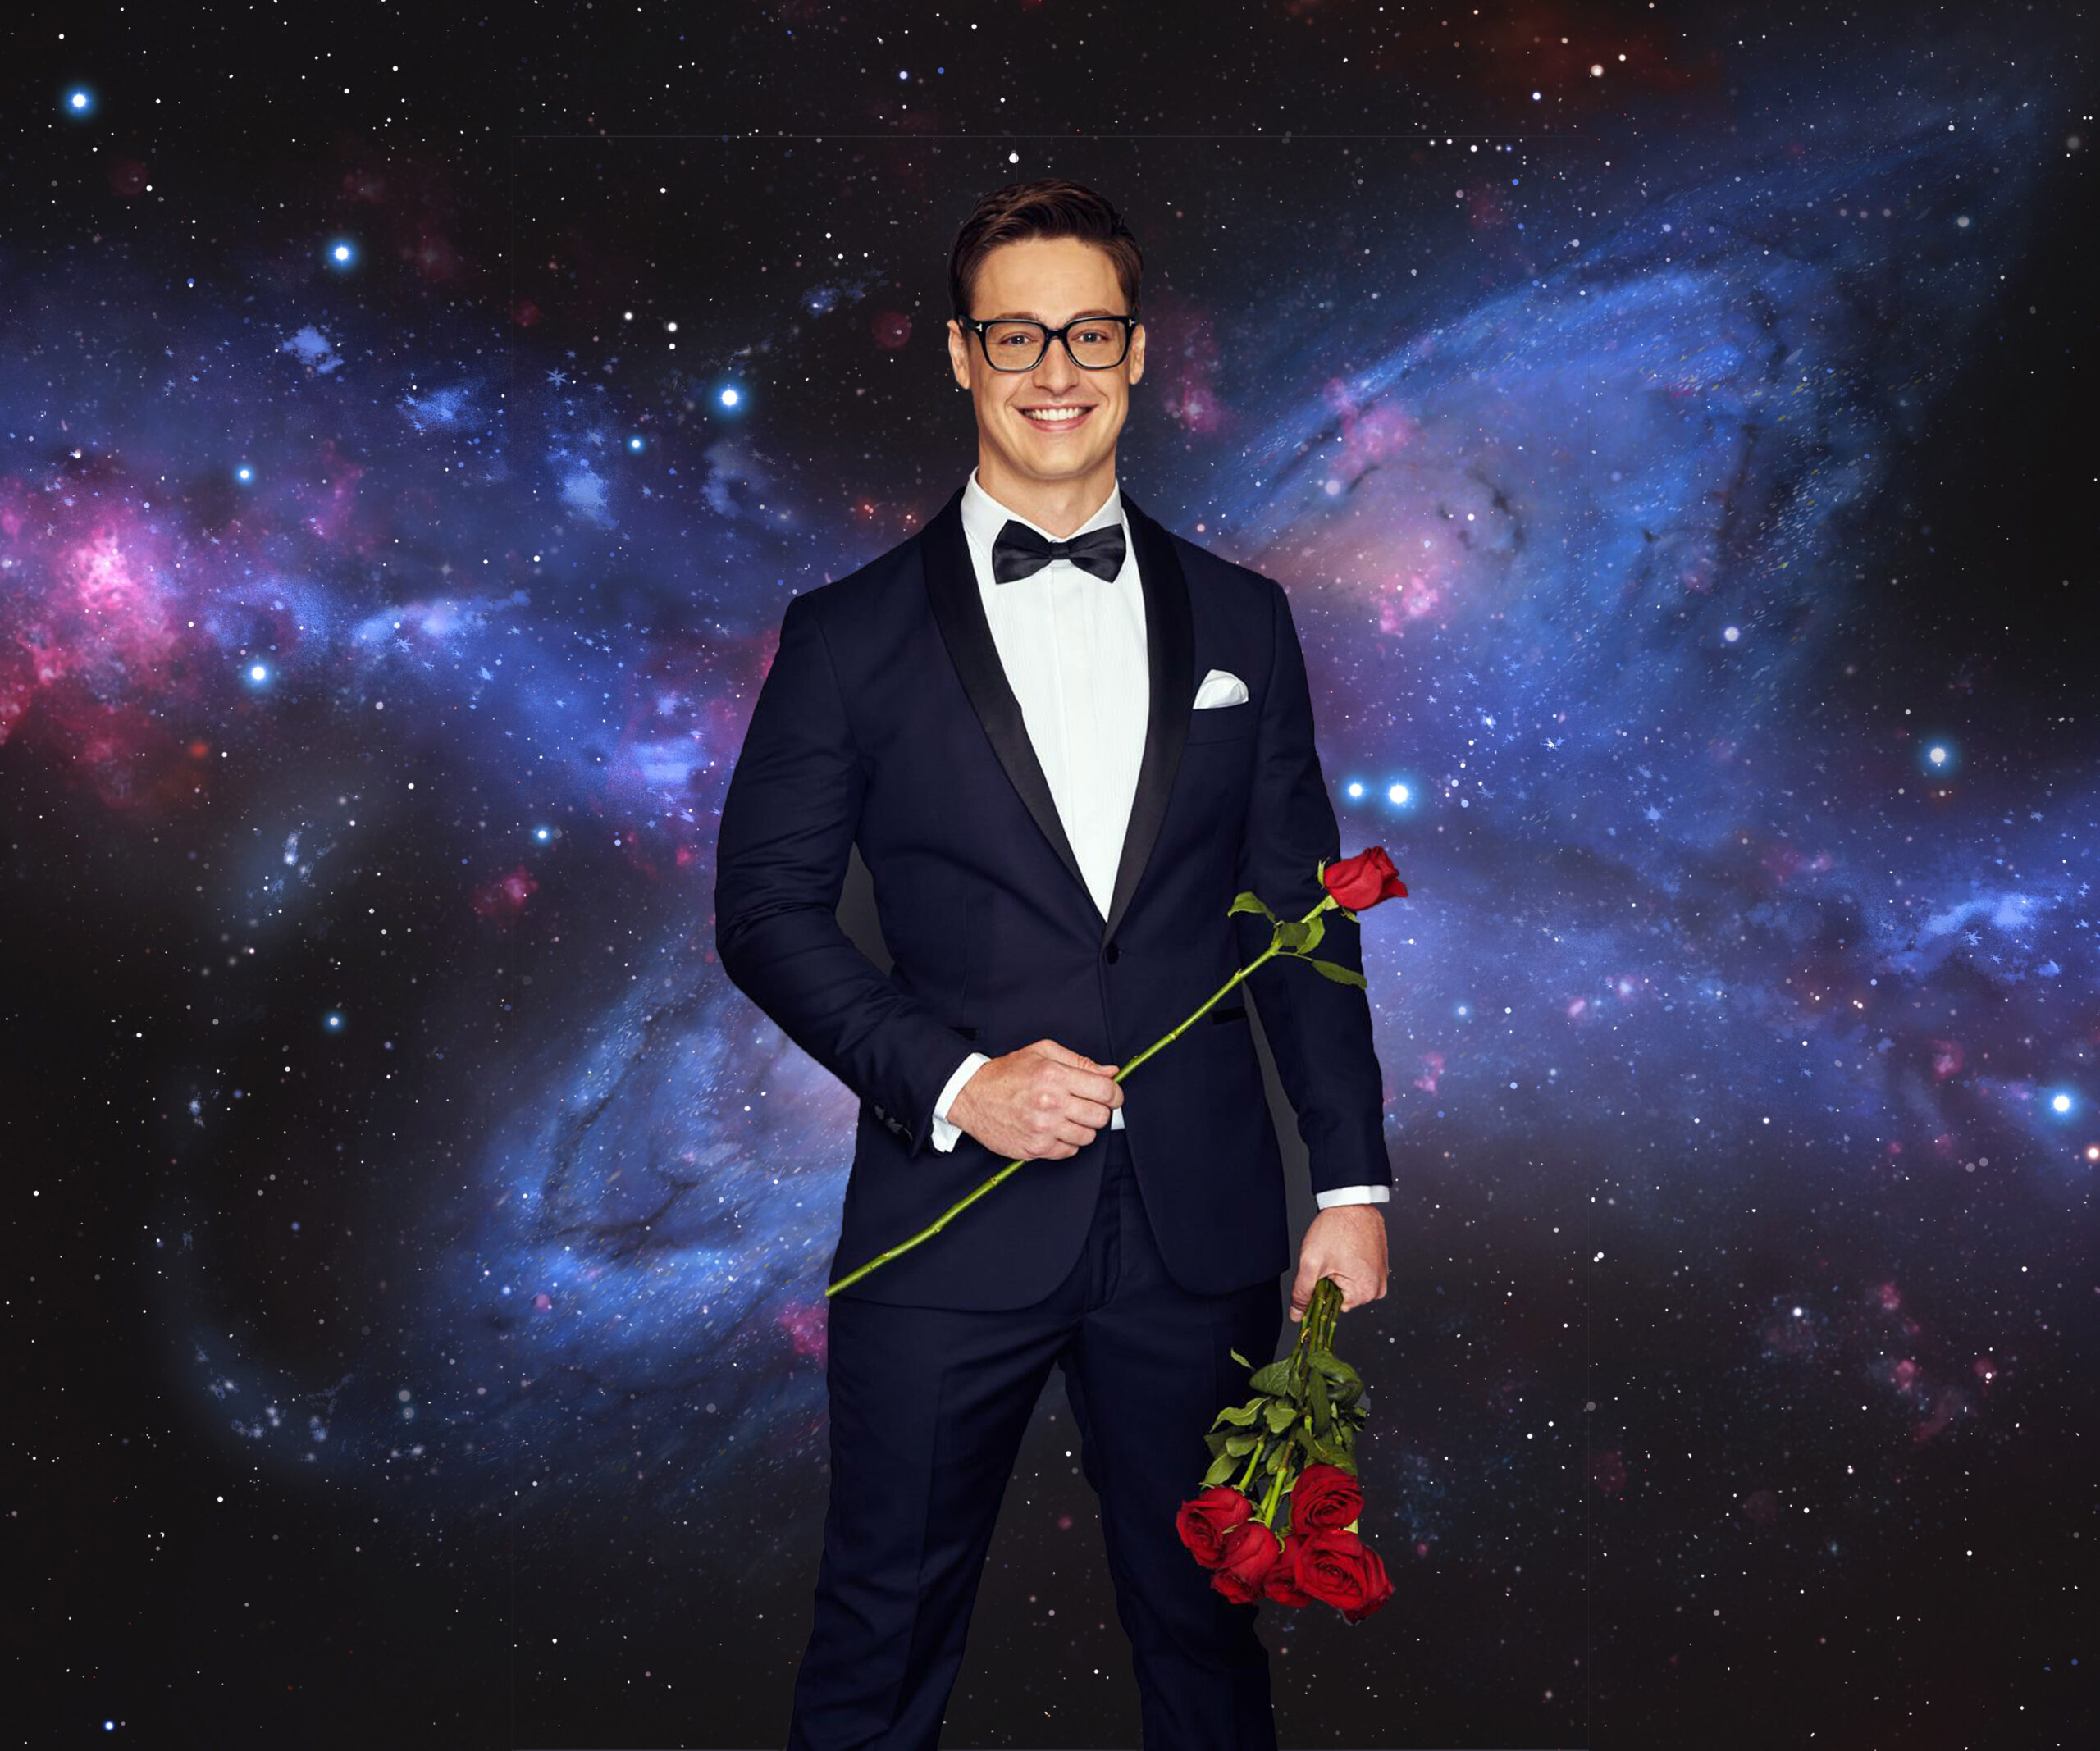 Our newest Bachelor is an astrophysicist, but what does that even mean?